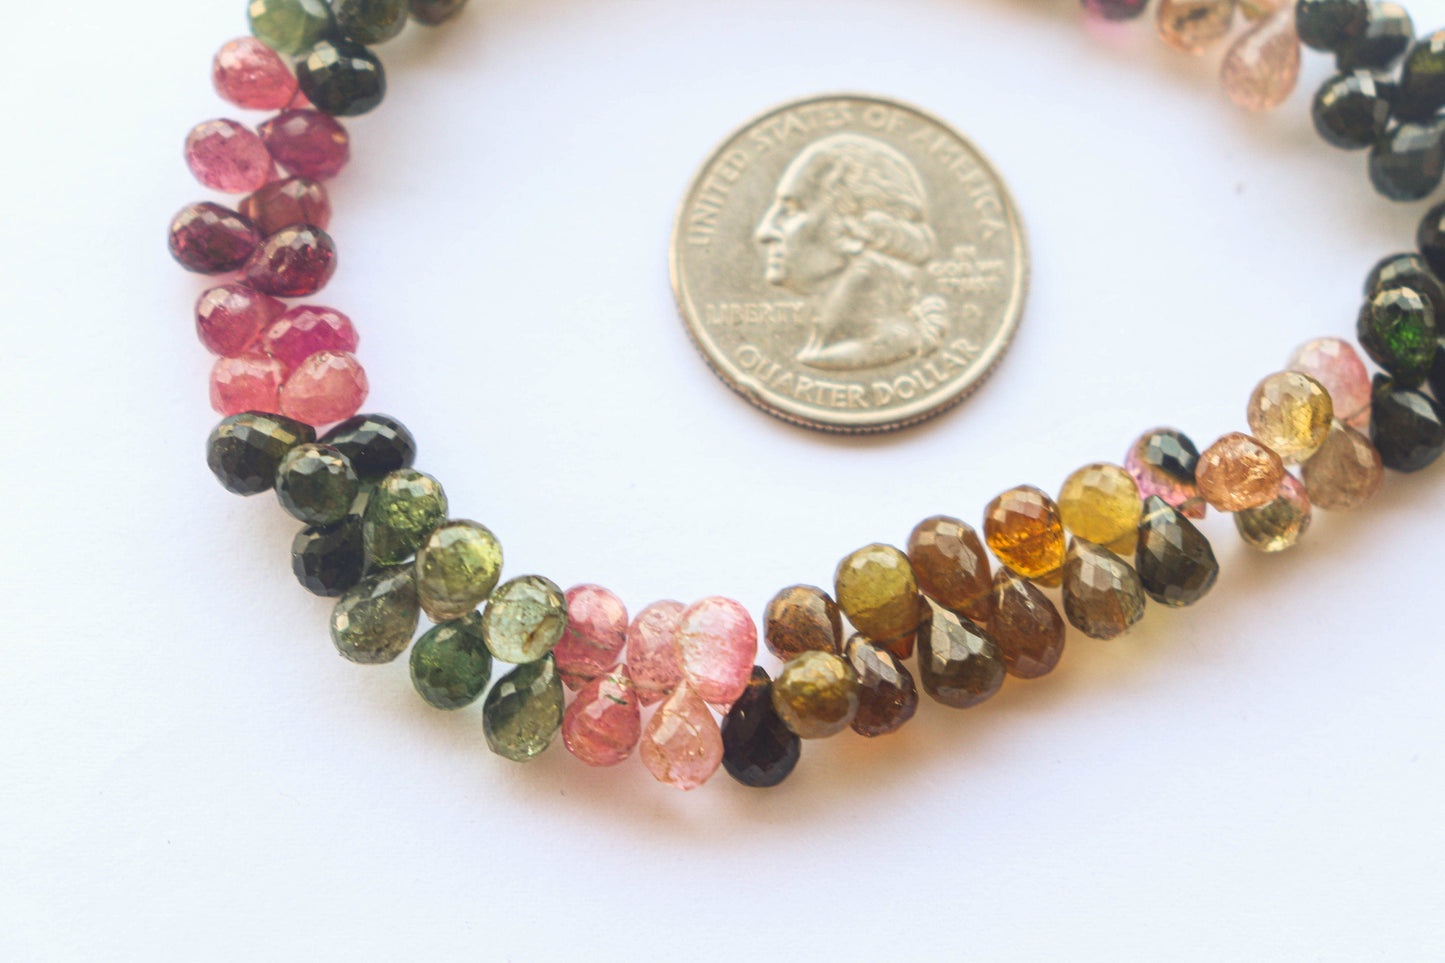 Multi Tourmaline Faceted Drops | 5x7mm | 9 inch | 88 Pieces | Natural Tourmaline Gemstone | Beadsforyourjewellery | BFYJ895 Beadsforyourjewelry